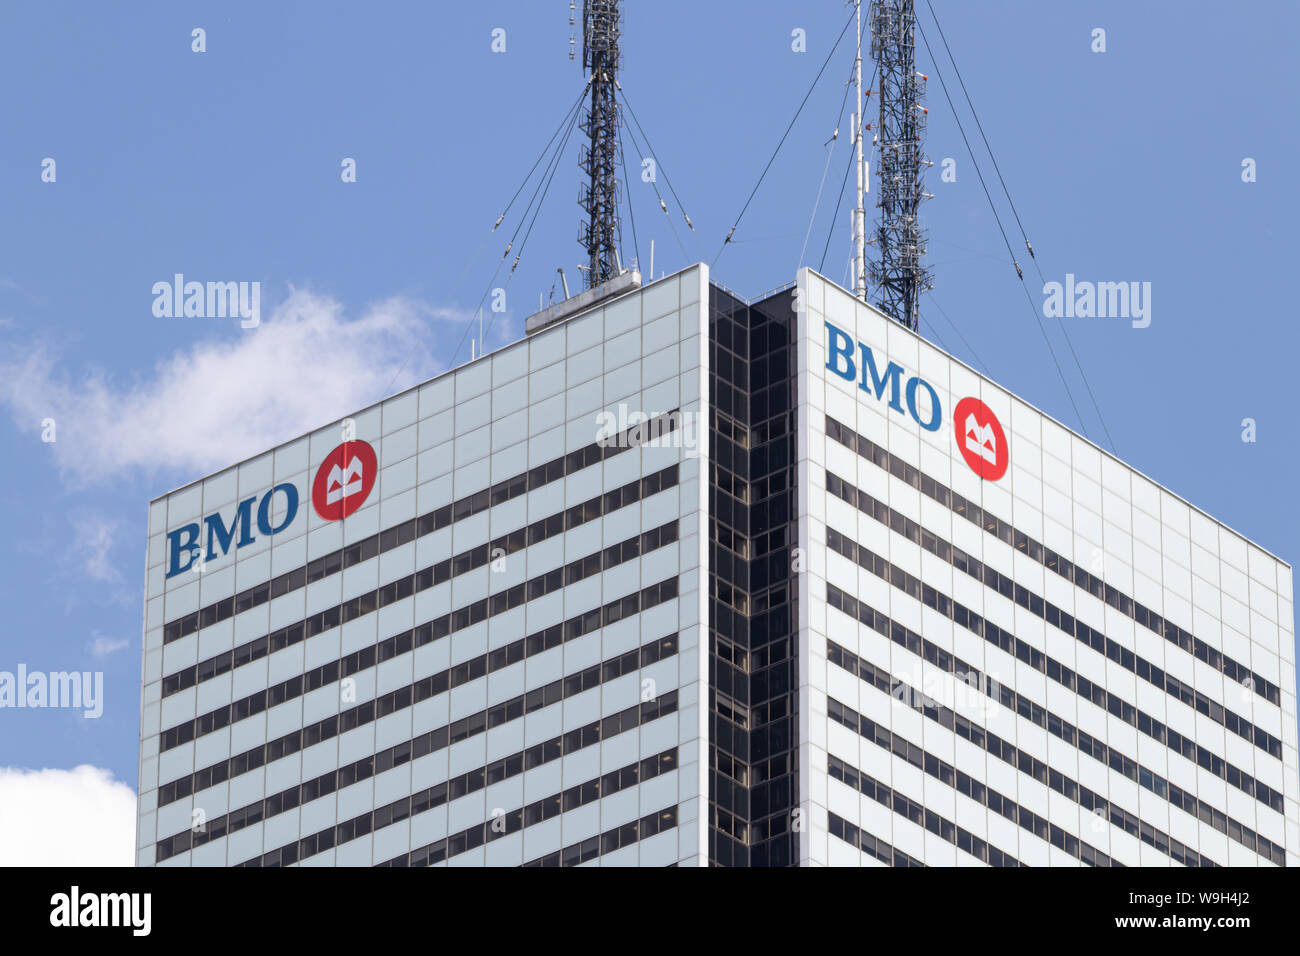 Top of First Canadian Place skyscraper in downtown Toronto with BMO (Bank of Montreal) logo seen on each side. Stock Photo